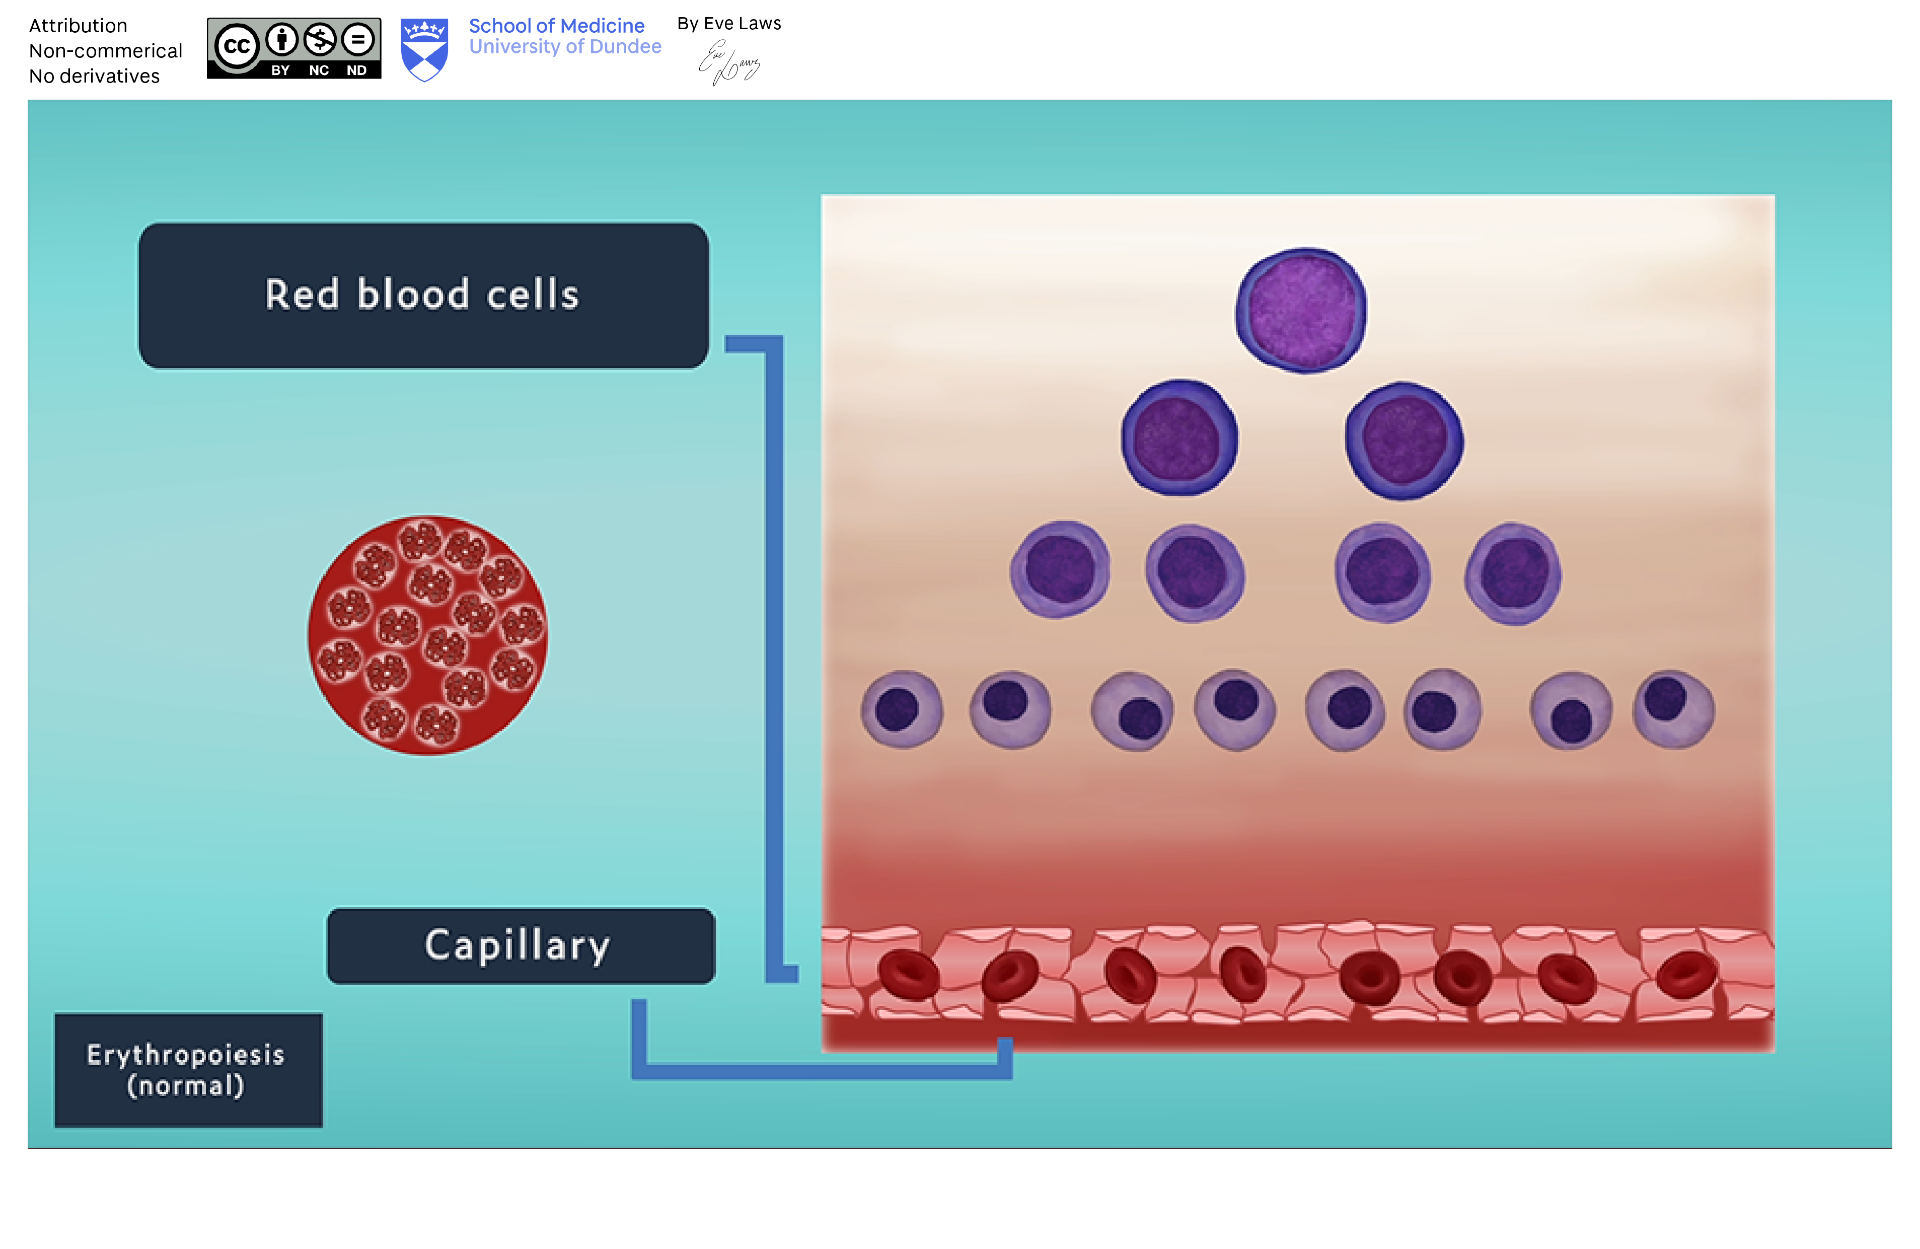 Normal erythropoiesis sequence